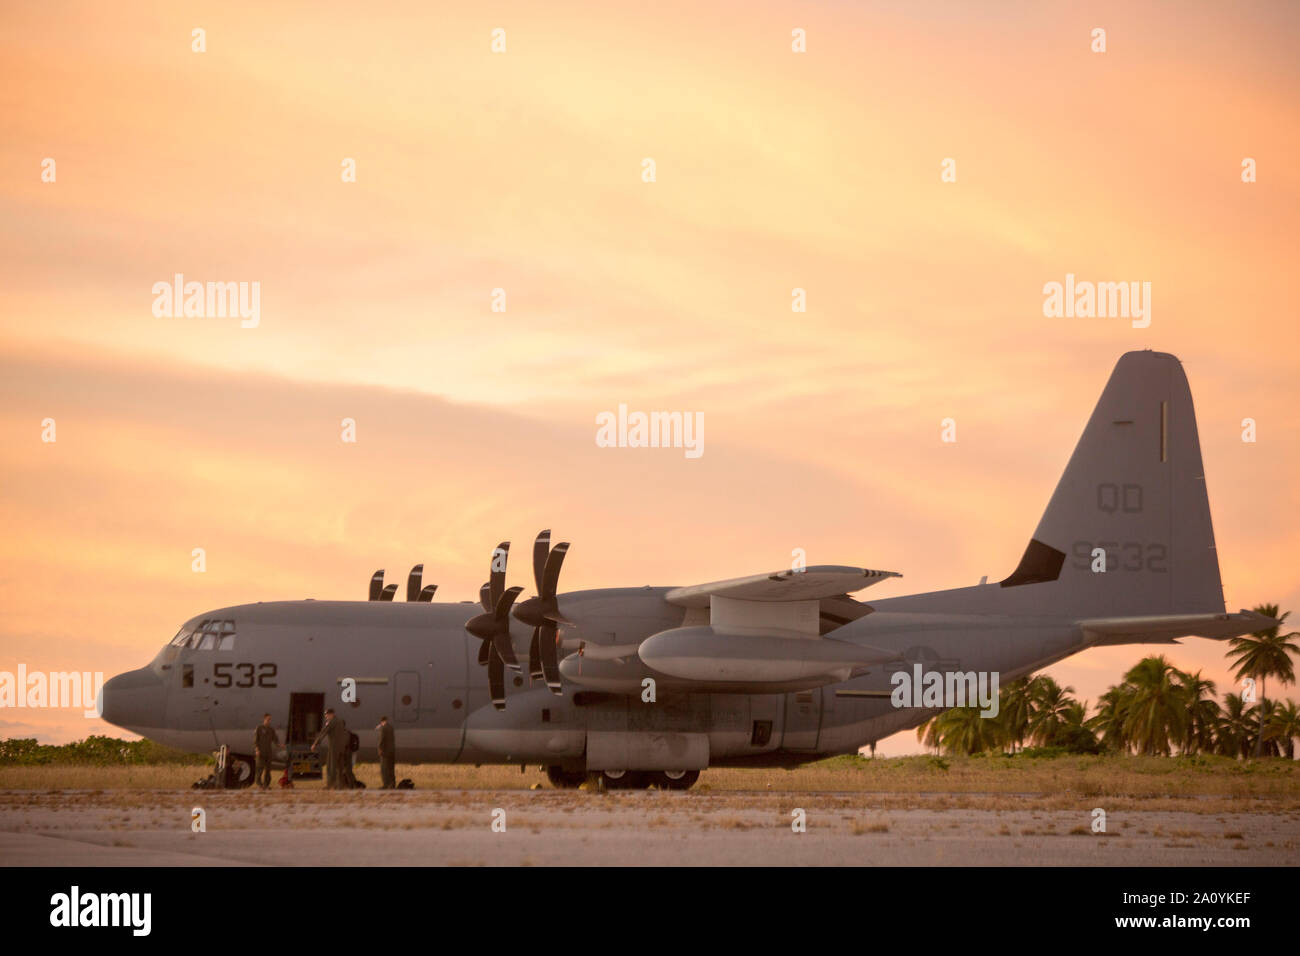 U.S. Marines debark a KC-130J Hercules during the Marine Rotational Force - Darwin trans-Pacific flight, Cassidy International Airport, Kiribati, Sep. 19, 2019. The flight was conducted to improve upon the Osprey trans-Pacific concept that has been developed and refined over the past three MRF-D iterations. (U.S. Marine Corps photo by 1st Lt. Colin Kennard) Stock Photo